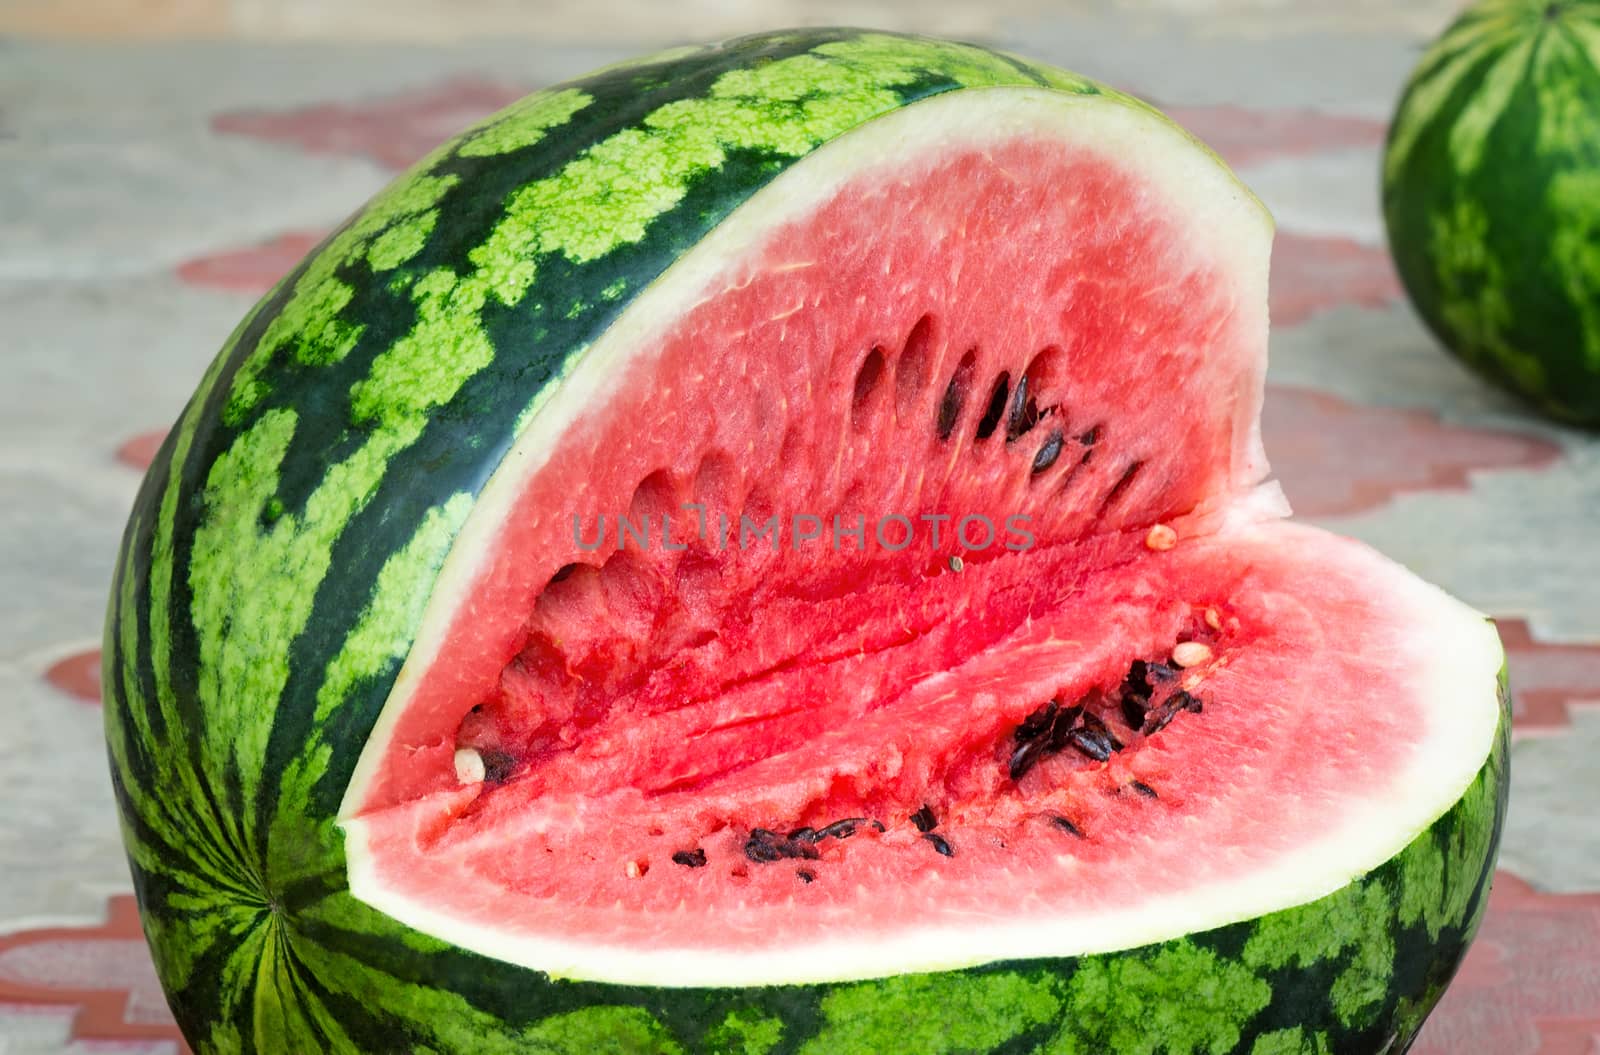 On the surface of the table on a plate of sliced watermelon with dark seeds inside. Presents closeup.